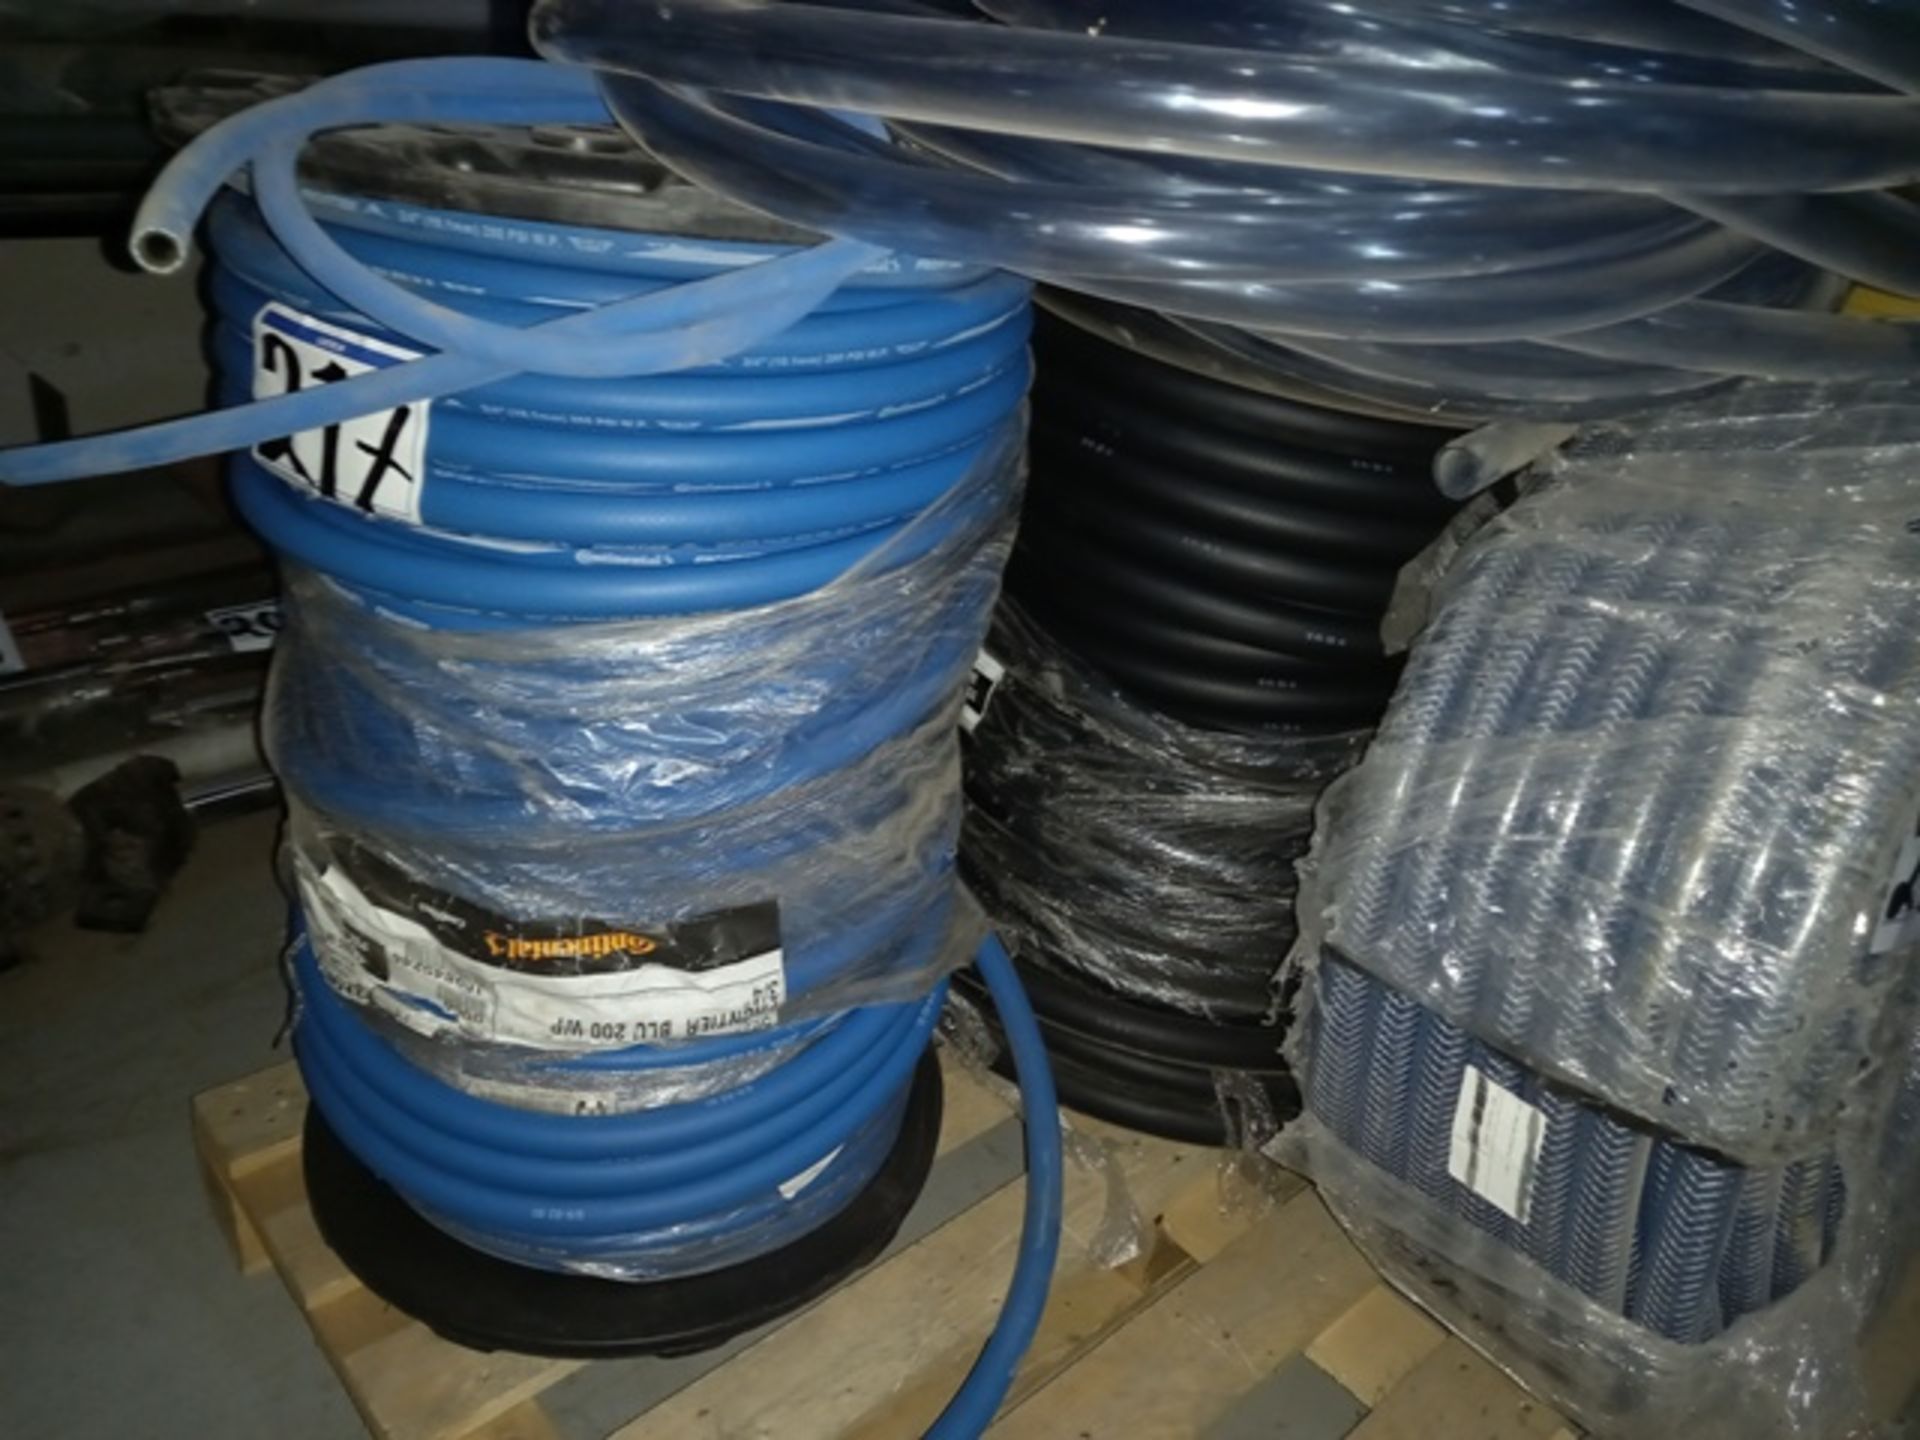 Lot of Plastic Hose Different Sizes - Image 6 of 8